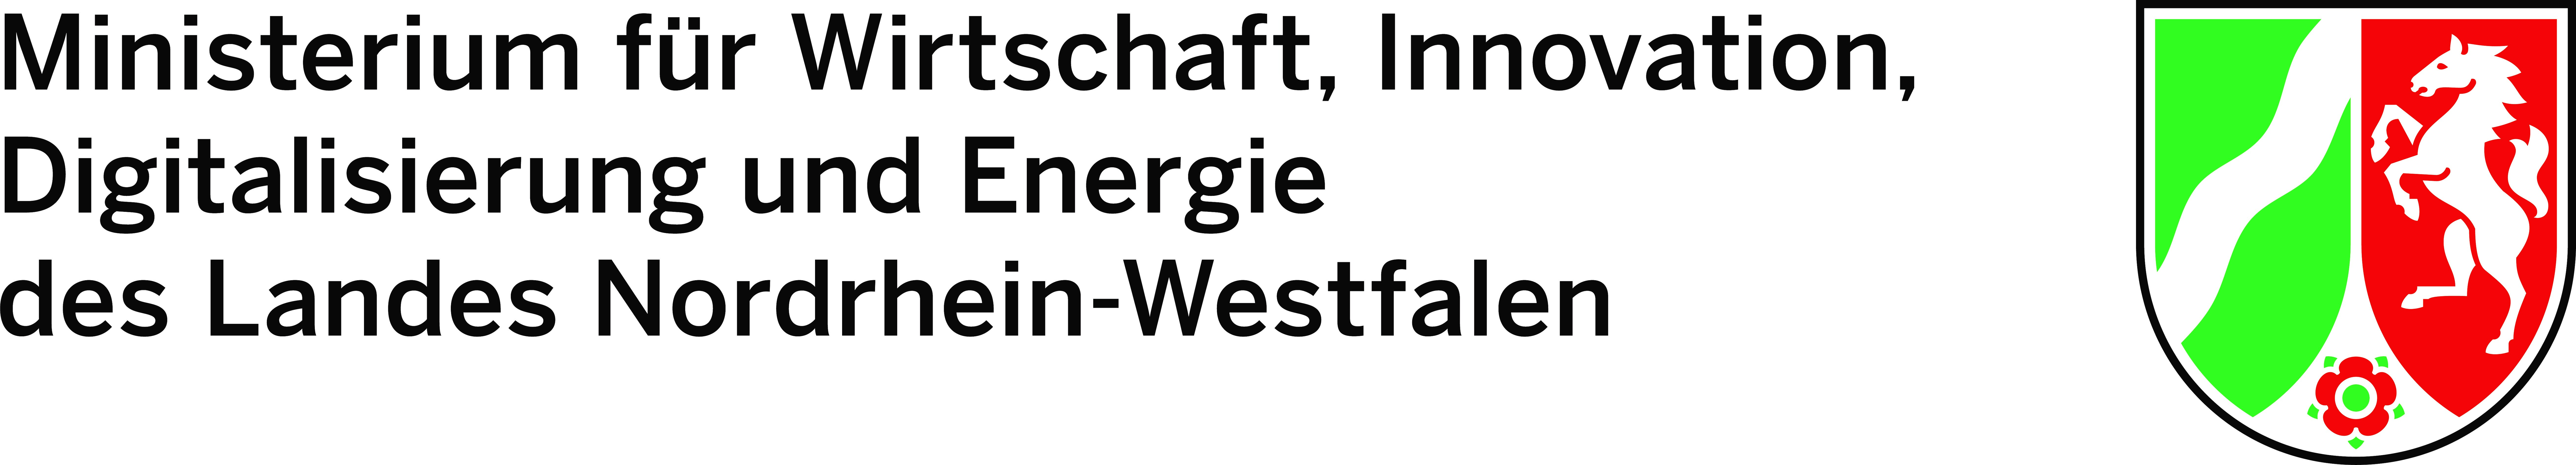 NRW Ministry of Economic Affairs,Industry,Climate Action & Energy